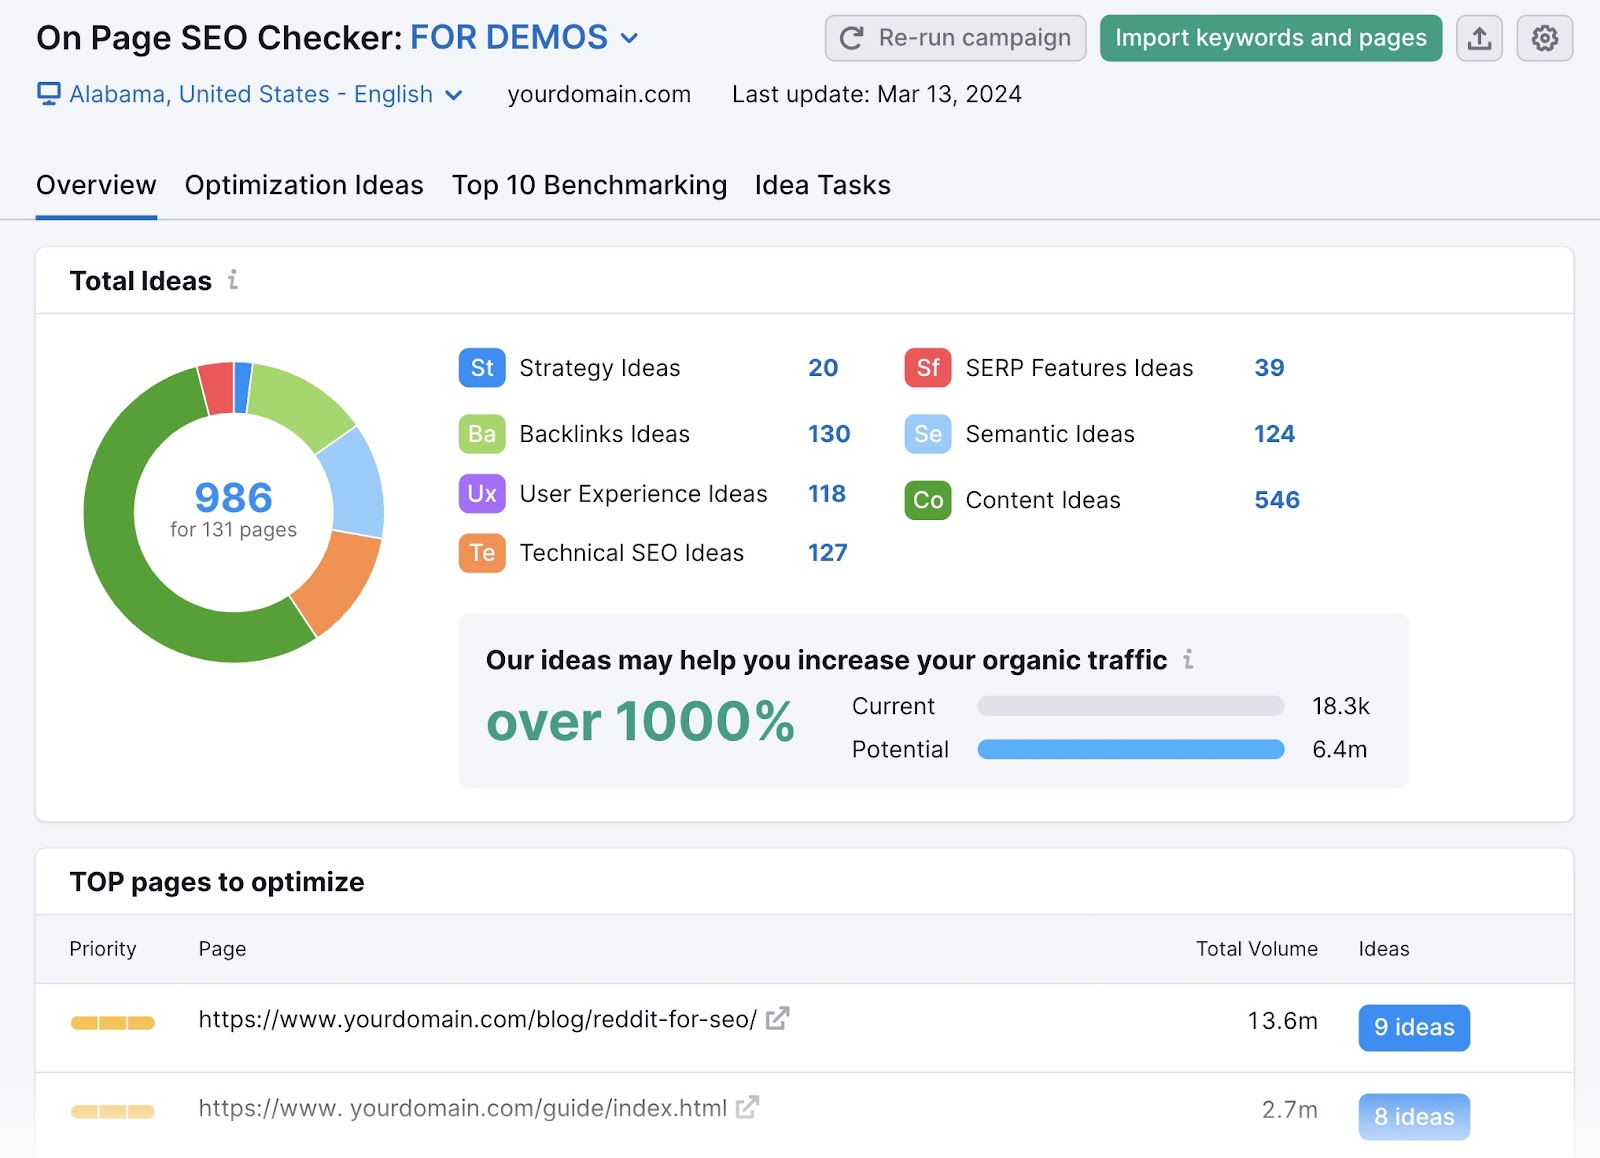 Ideas overview and top pages to optimize list in On Page SEO Checker